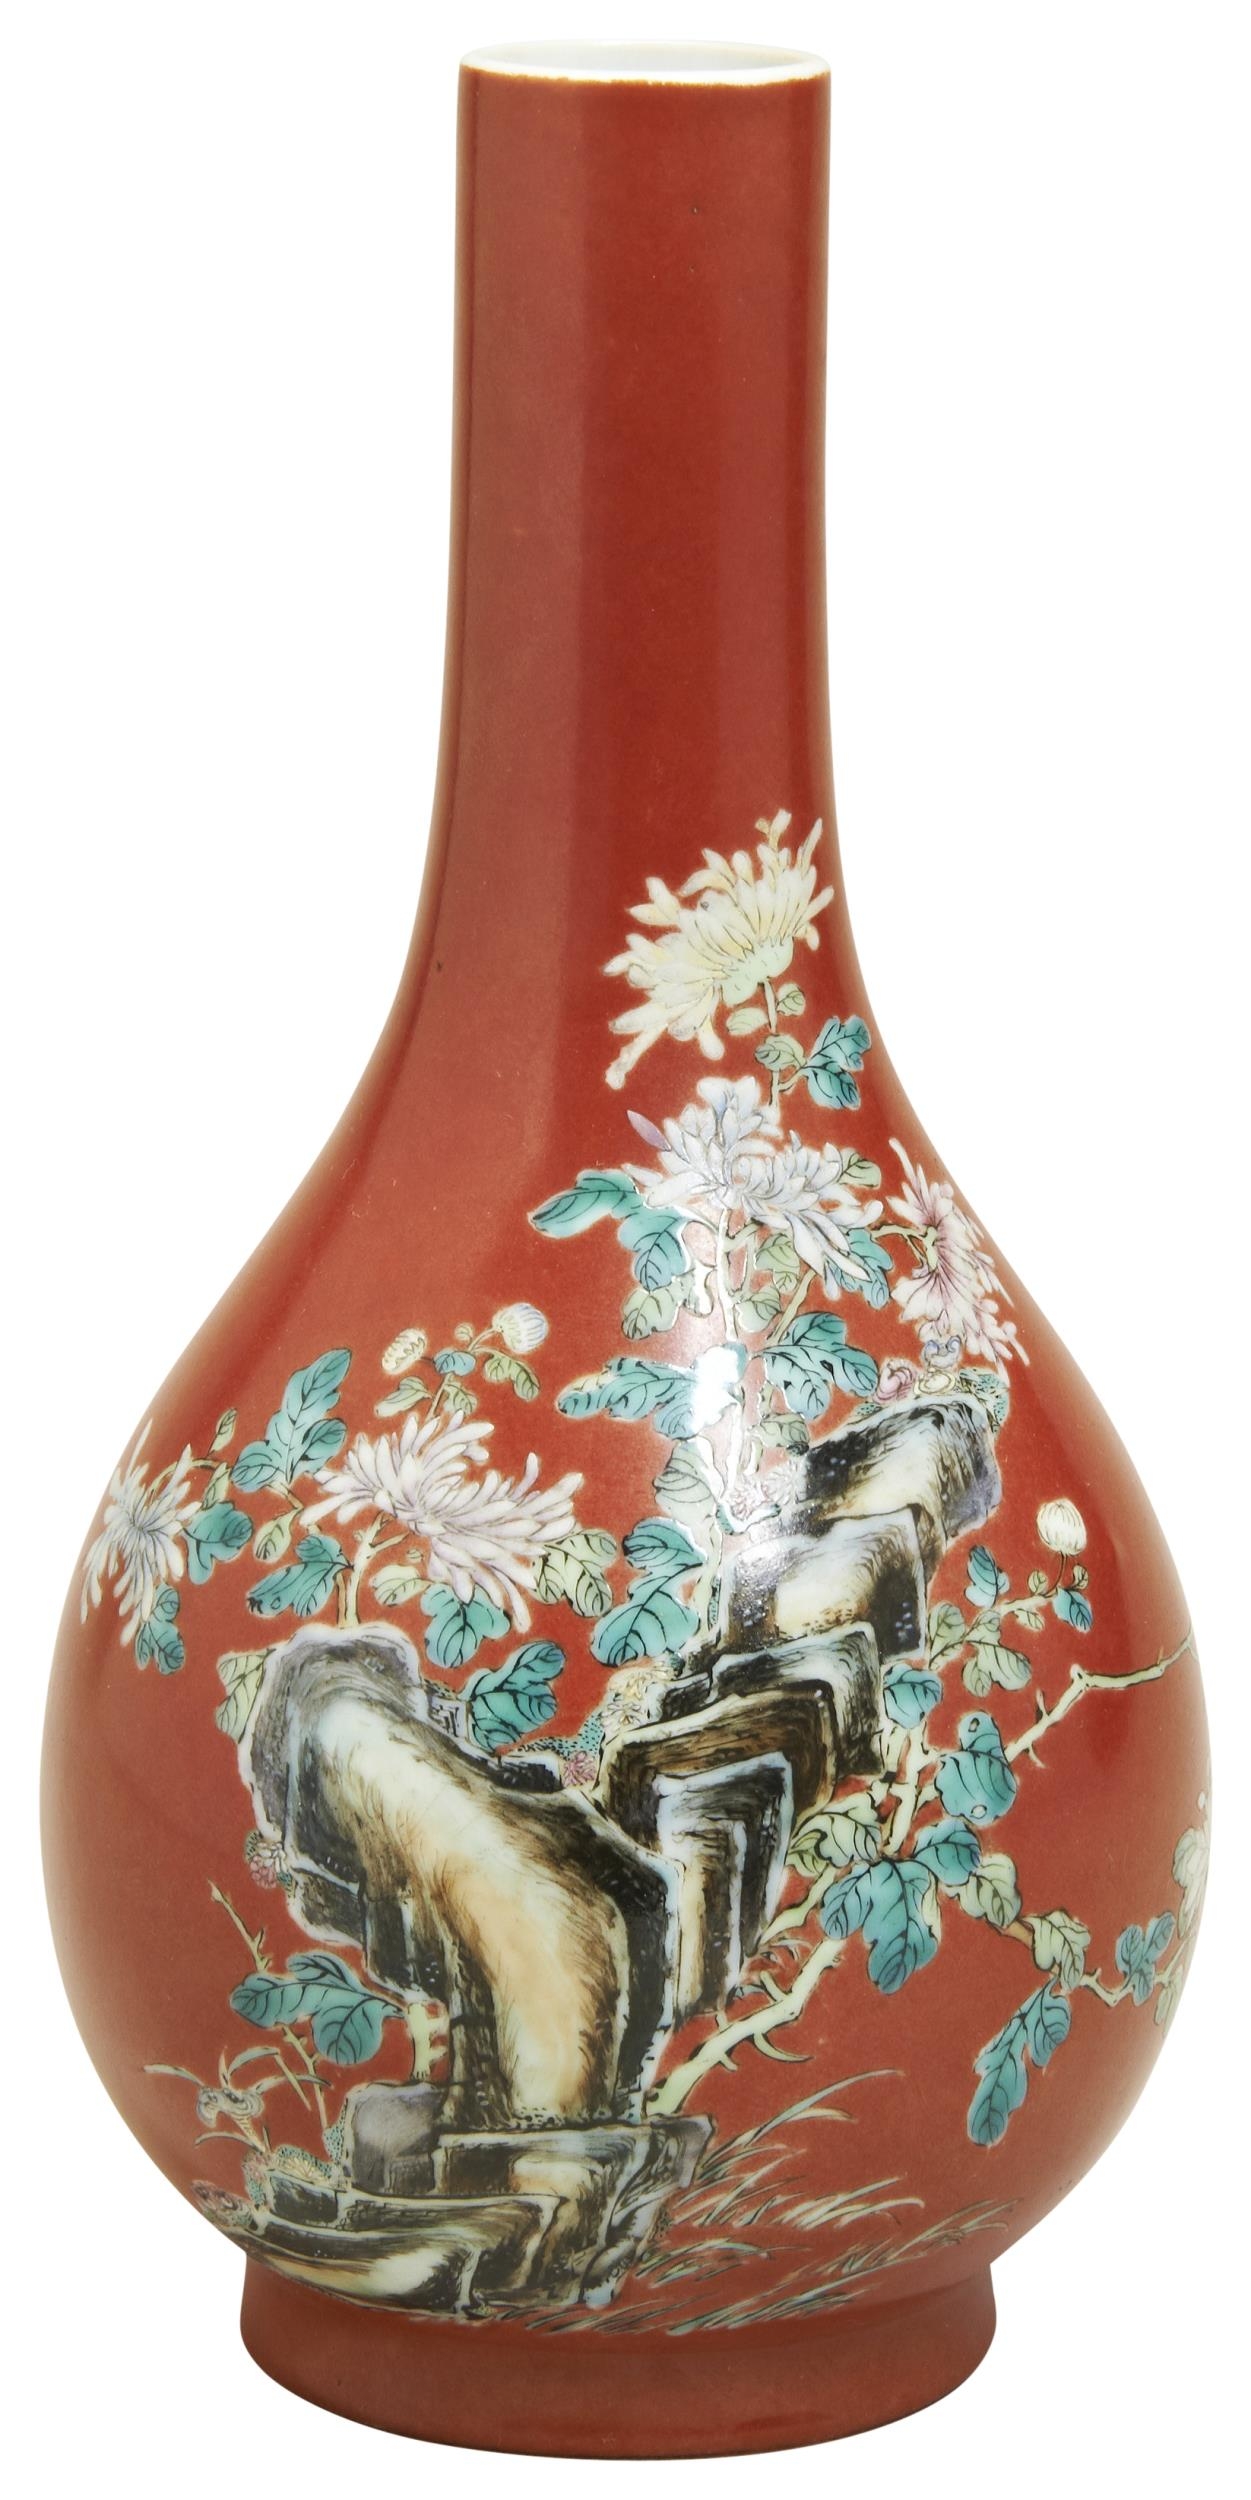 AN EXTREMELY RARE CORAL-RED BOTTLE VASE SHENDE TANG ZHI MARK IN IRON-RED, DAOGUANG PERIOD (1821-